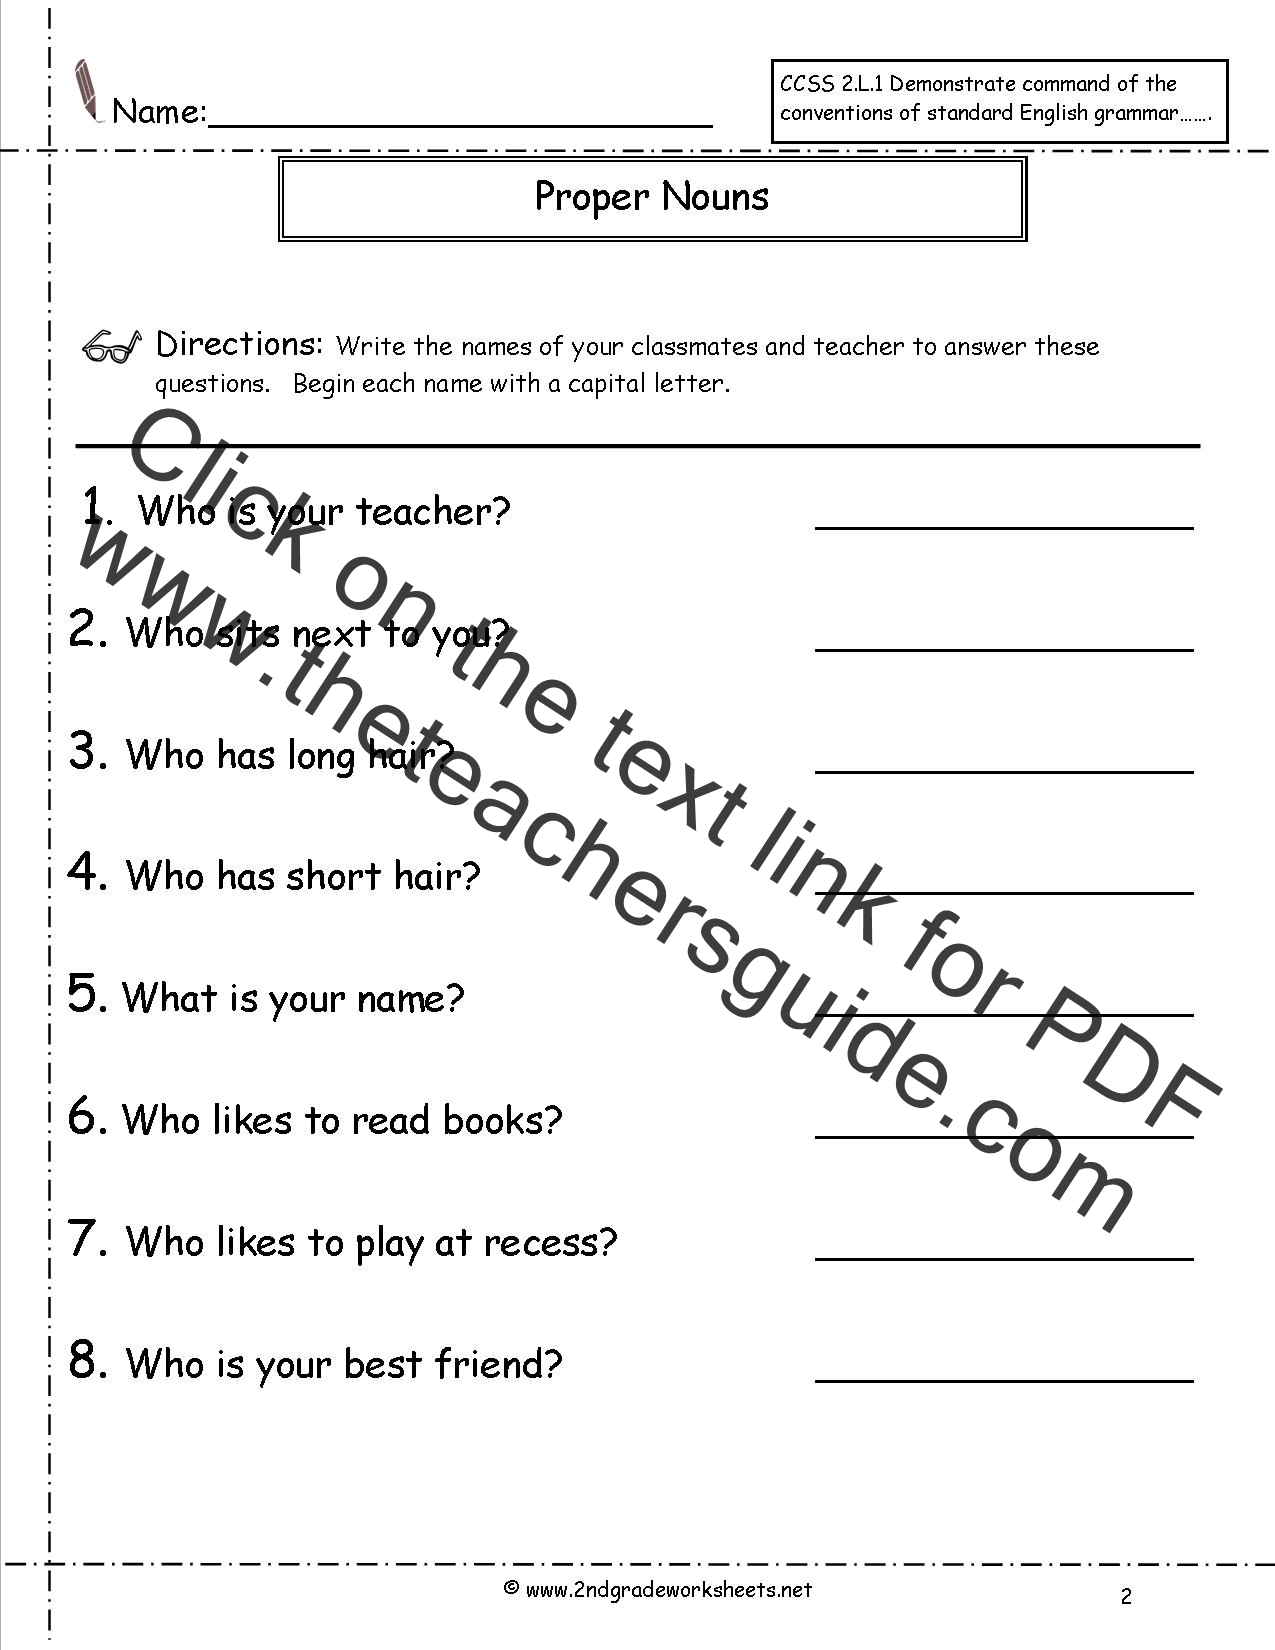 Common and Proper Nouns Worksheet Within Proper Nouns Worksheet 2nd Grade